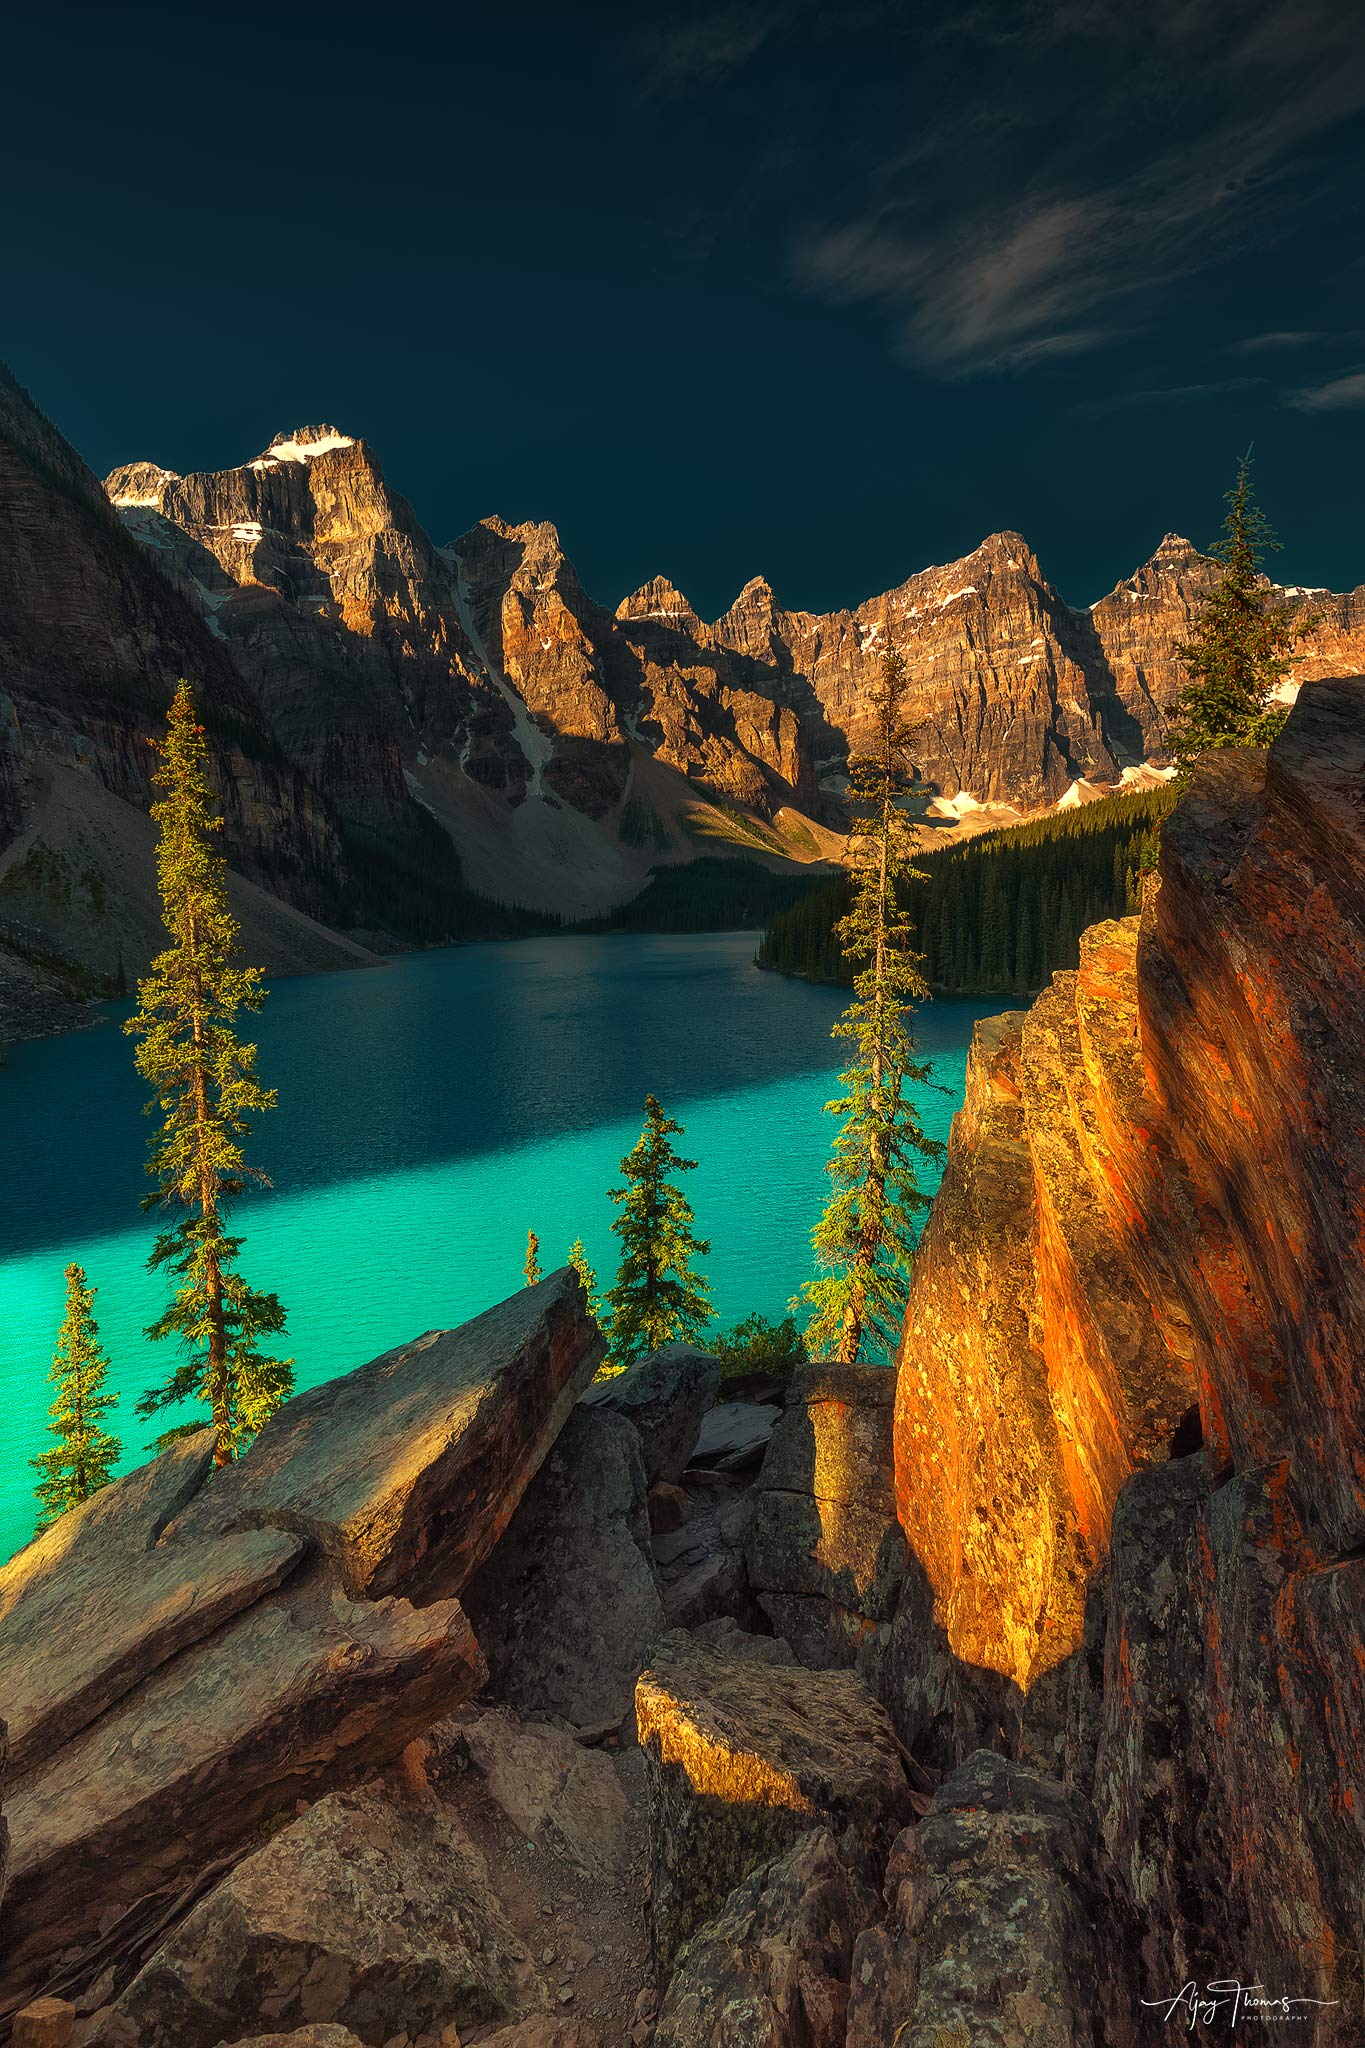 Moraine Lake in Banff is a natural wonder that is a must-see destination for nature lovers and outdoor enthusiasts. The lake...